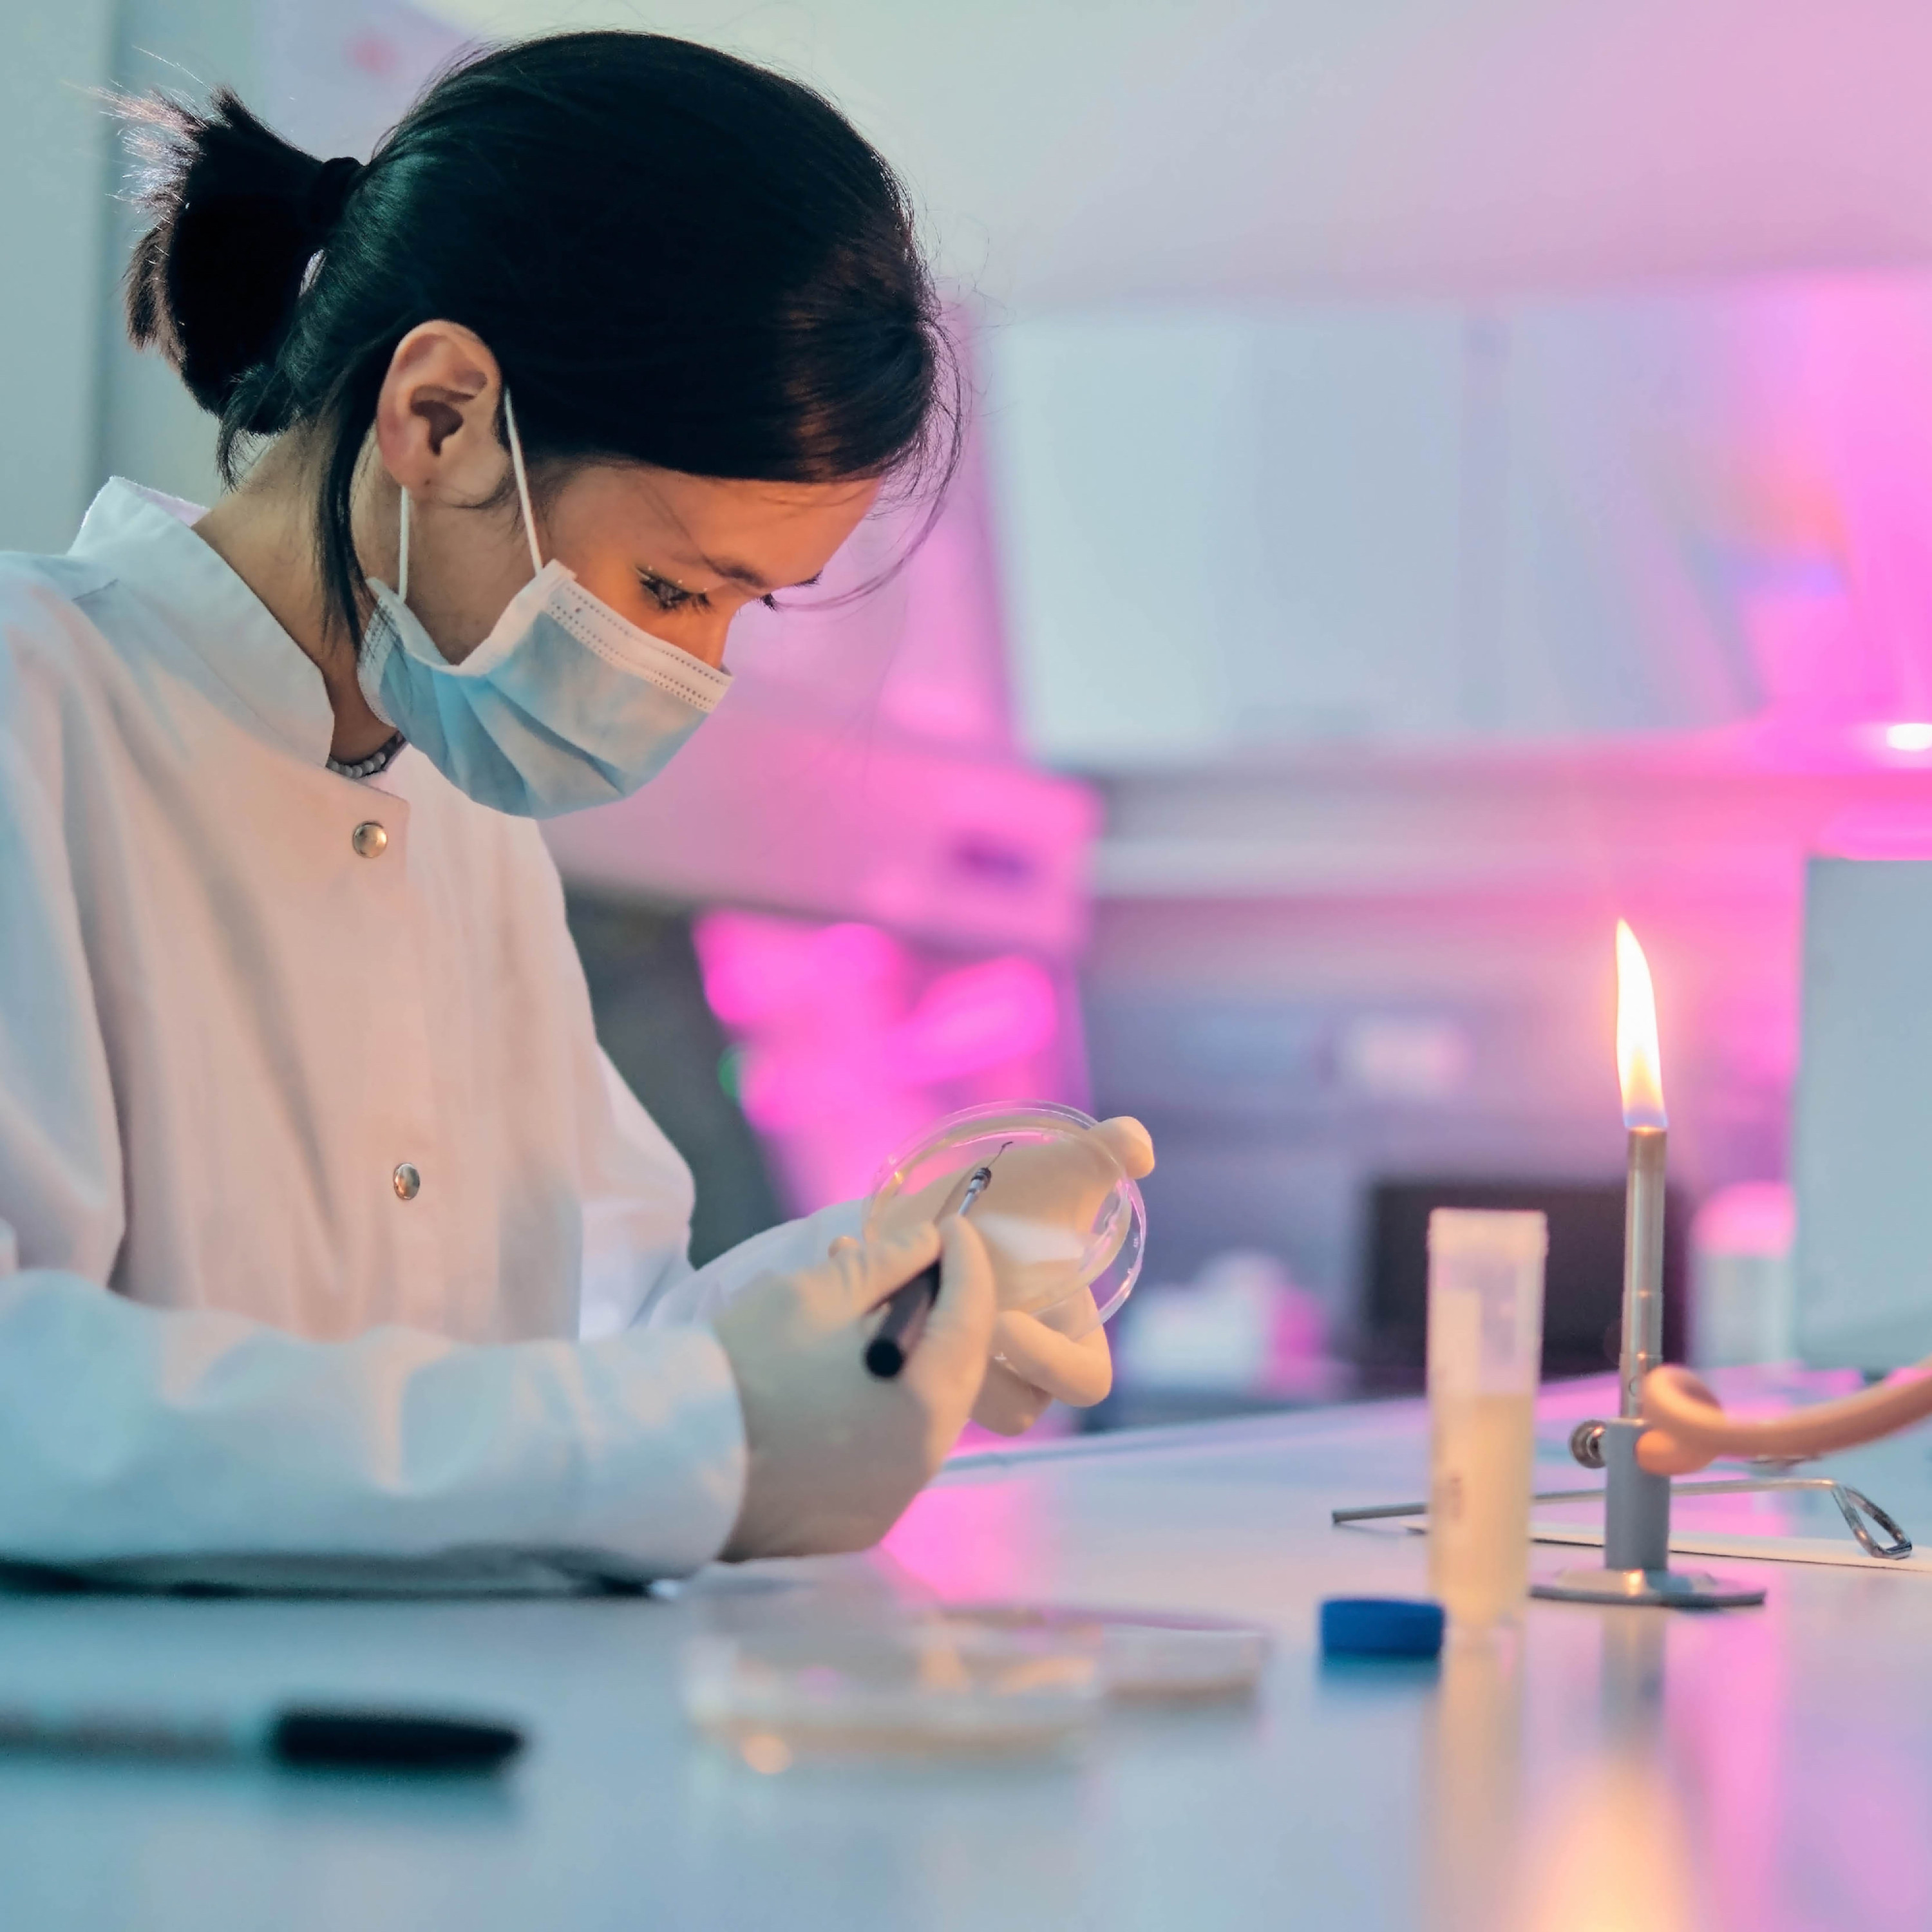 A woman performing an experiement in a lab